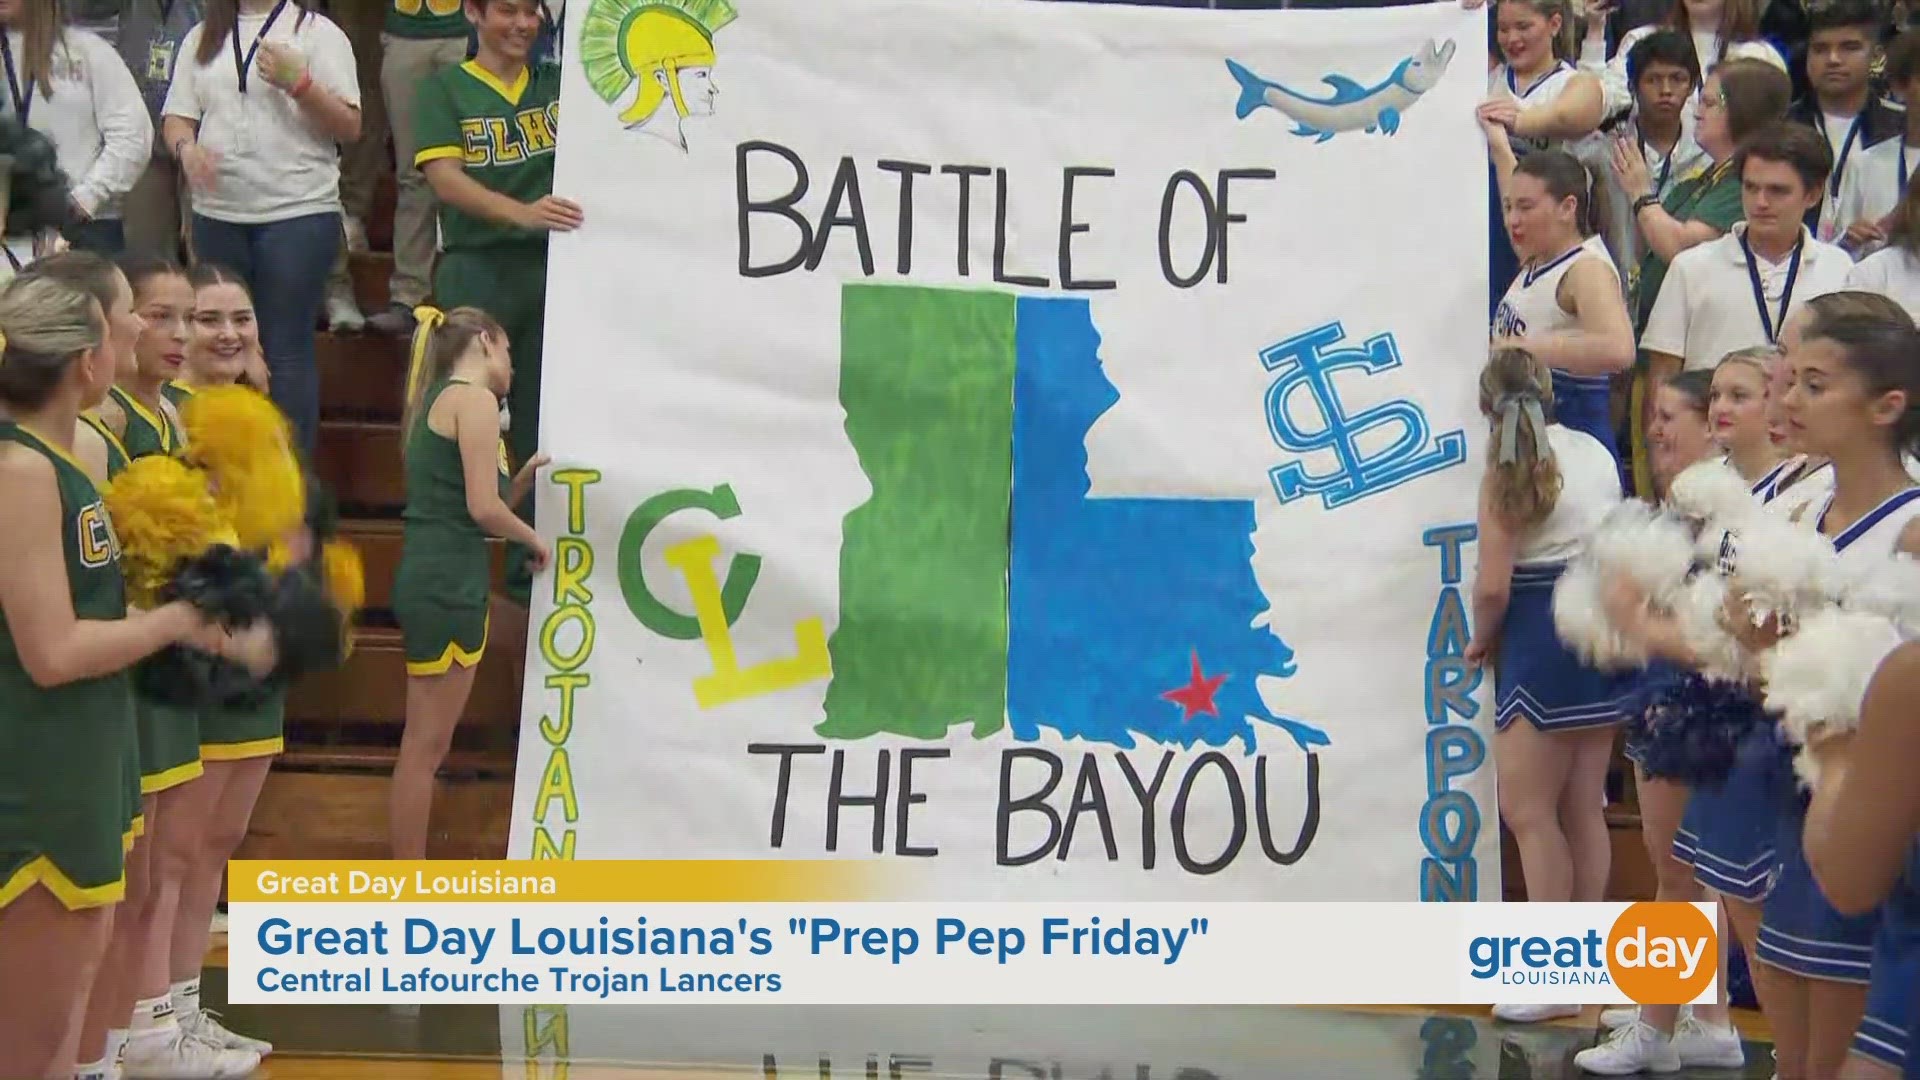 We went to Lafourche Parish to check out the rivalry between Central Lafourche and South Lafourche High Schools.